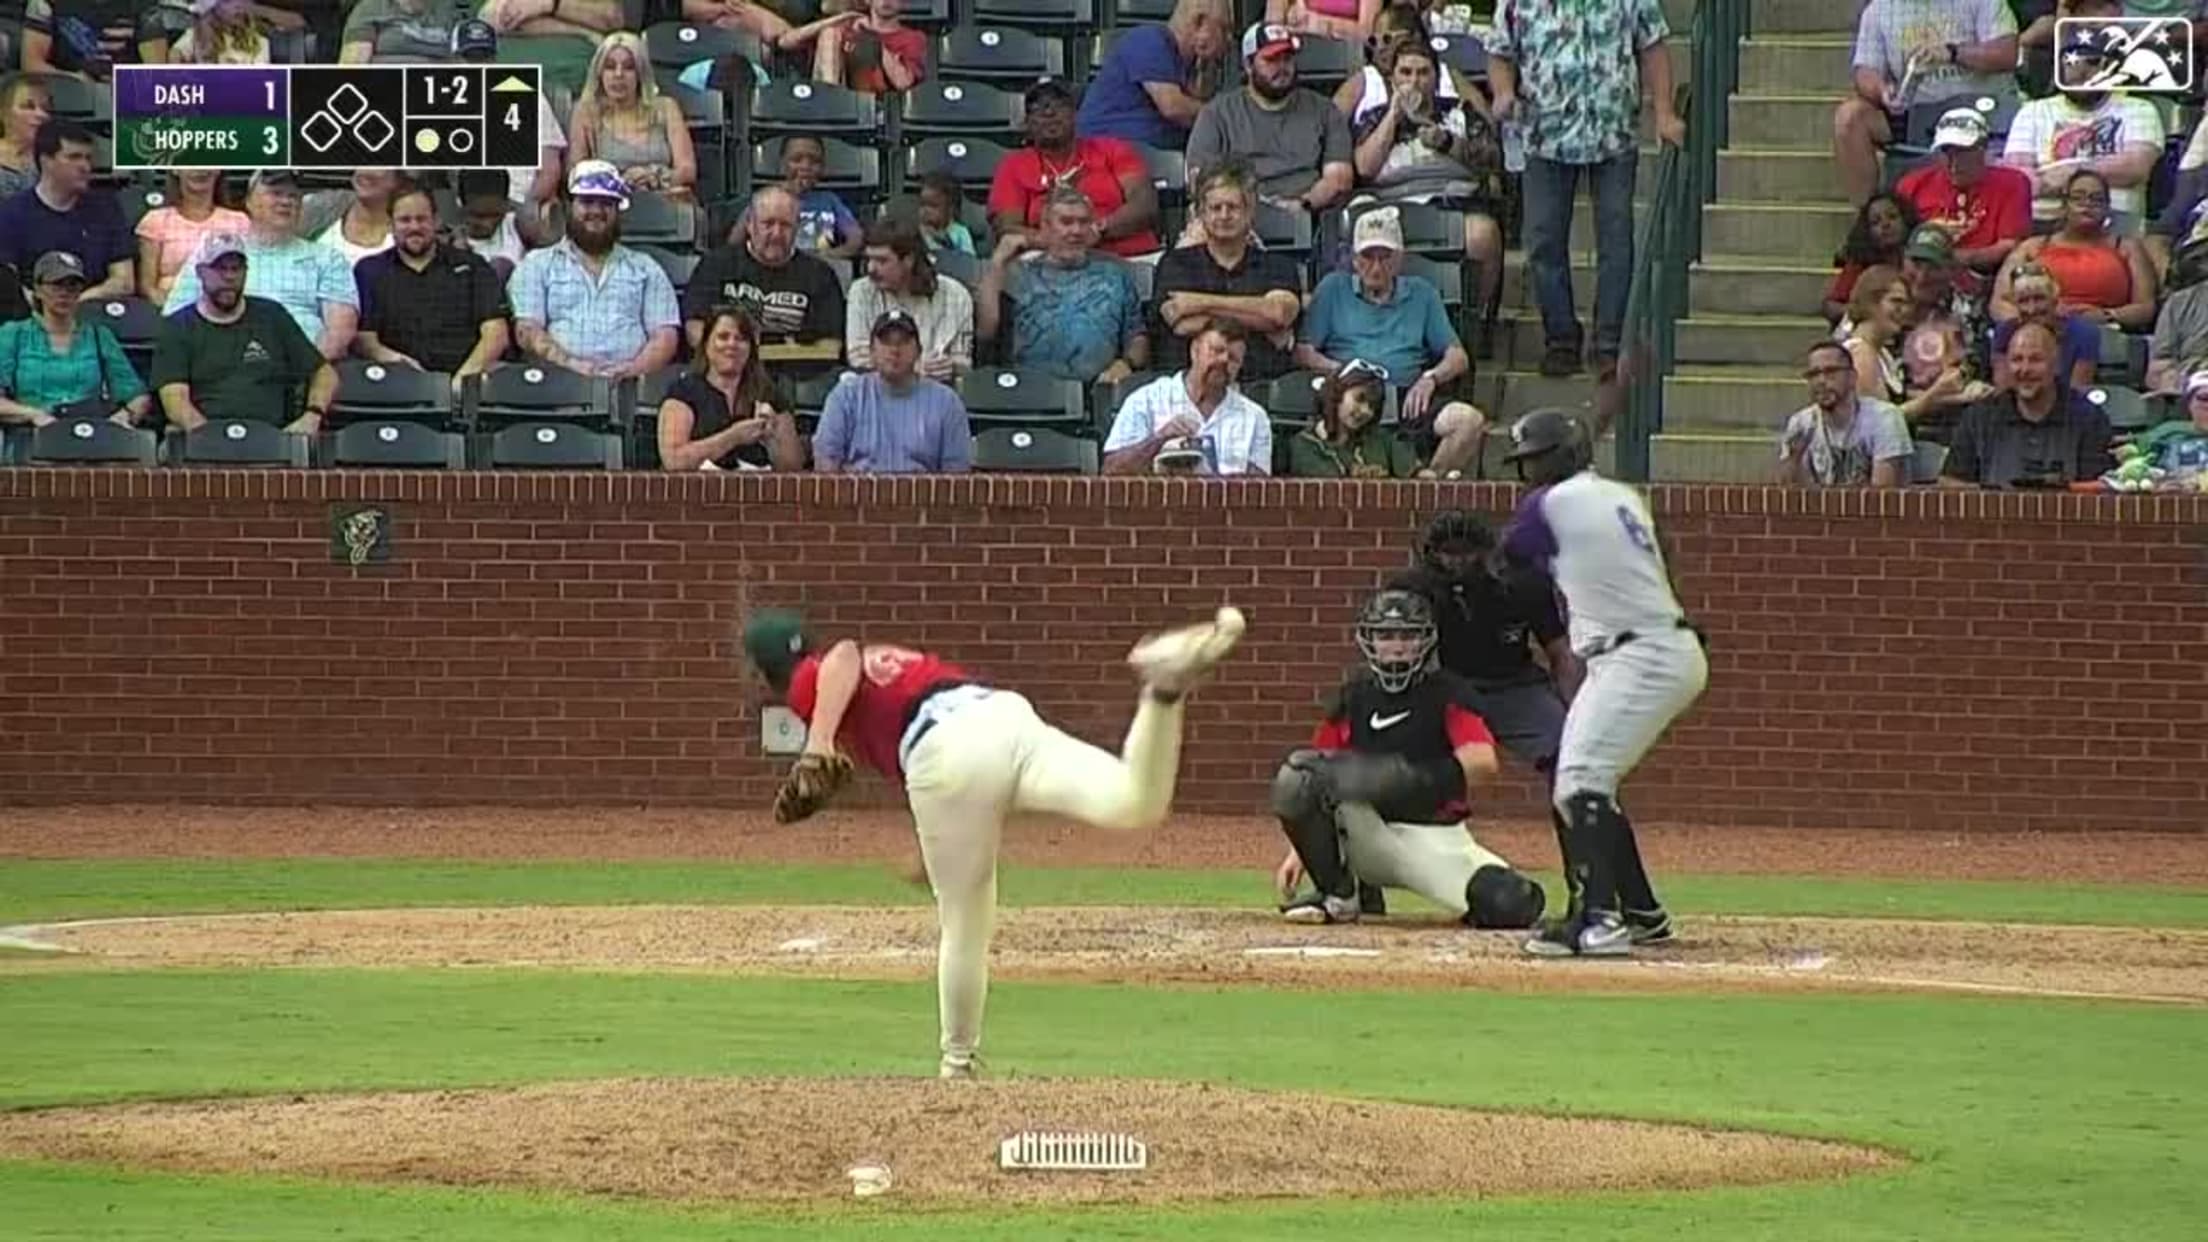 Bubba Chandler's 4th strikeout